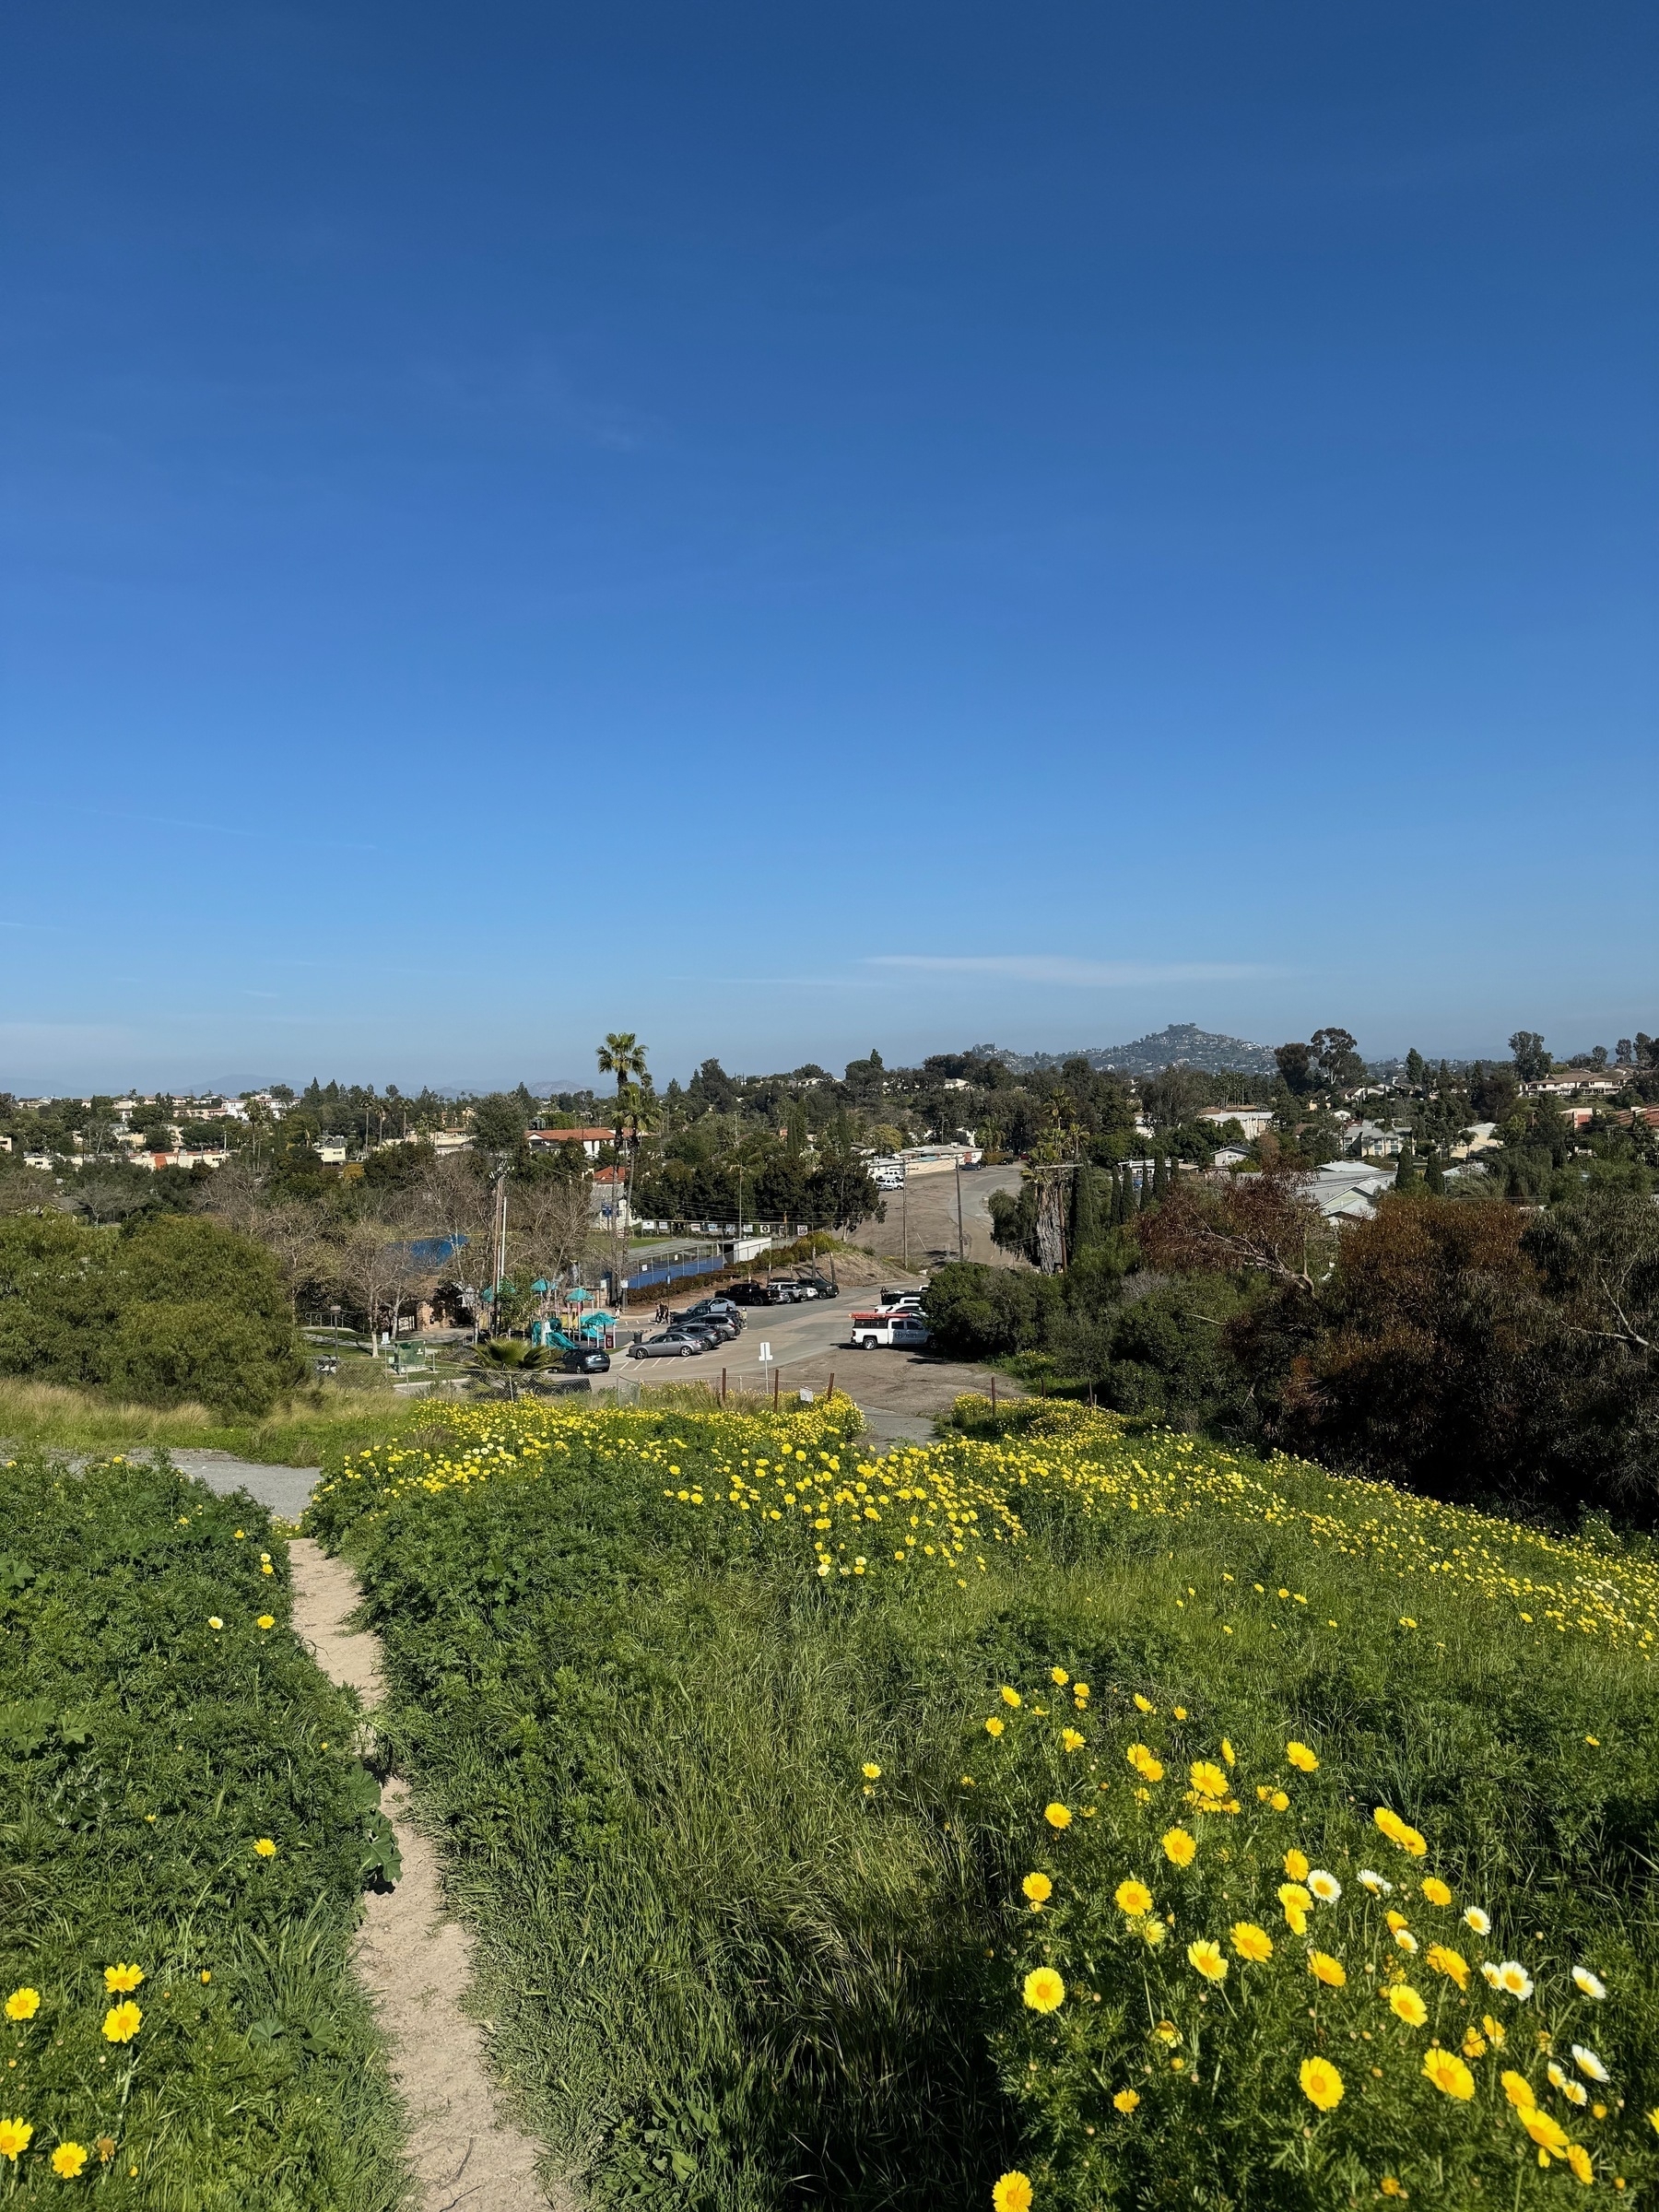 Photographer is standing on the top of a hill, with yellow flowers in the foreground and a commercial street in the background. In the far distance is a tall palm tree and small mountain. 